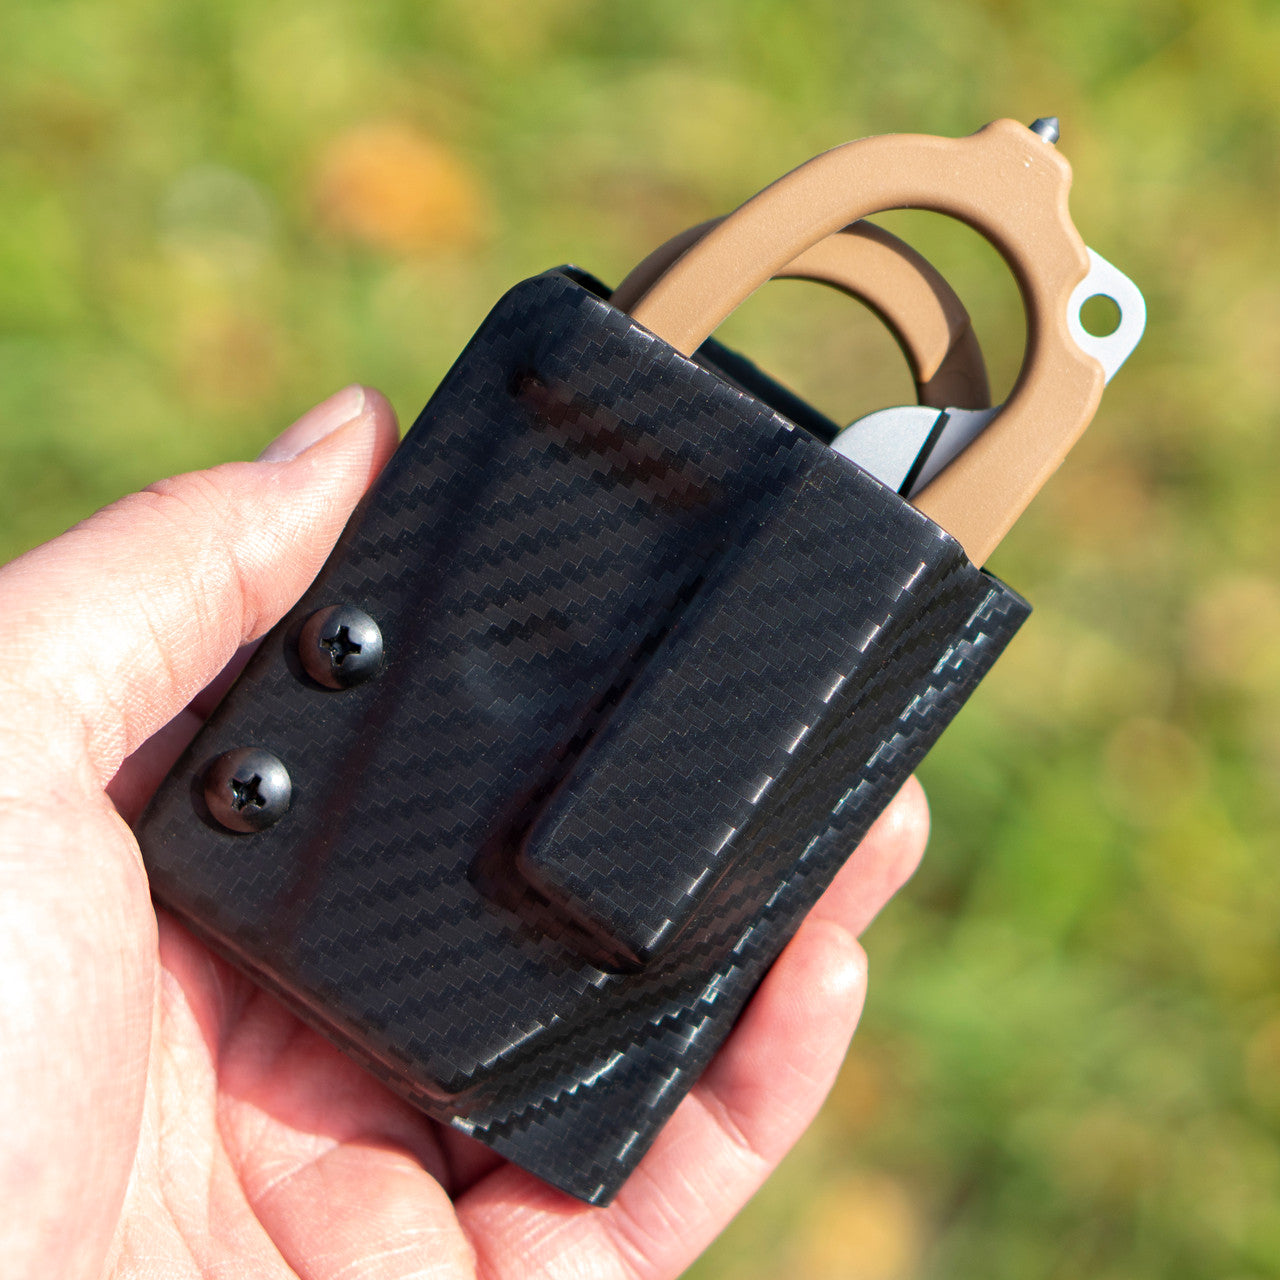 Kydex Sheath for the Leatherman Raptor Clip & Carry